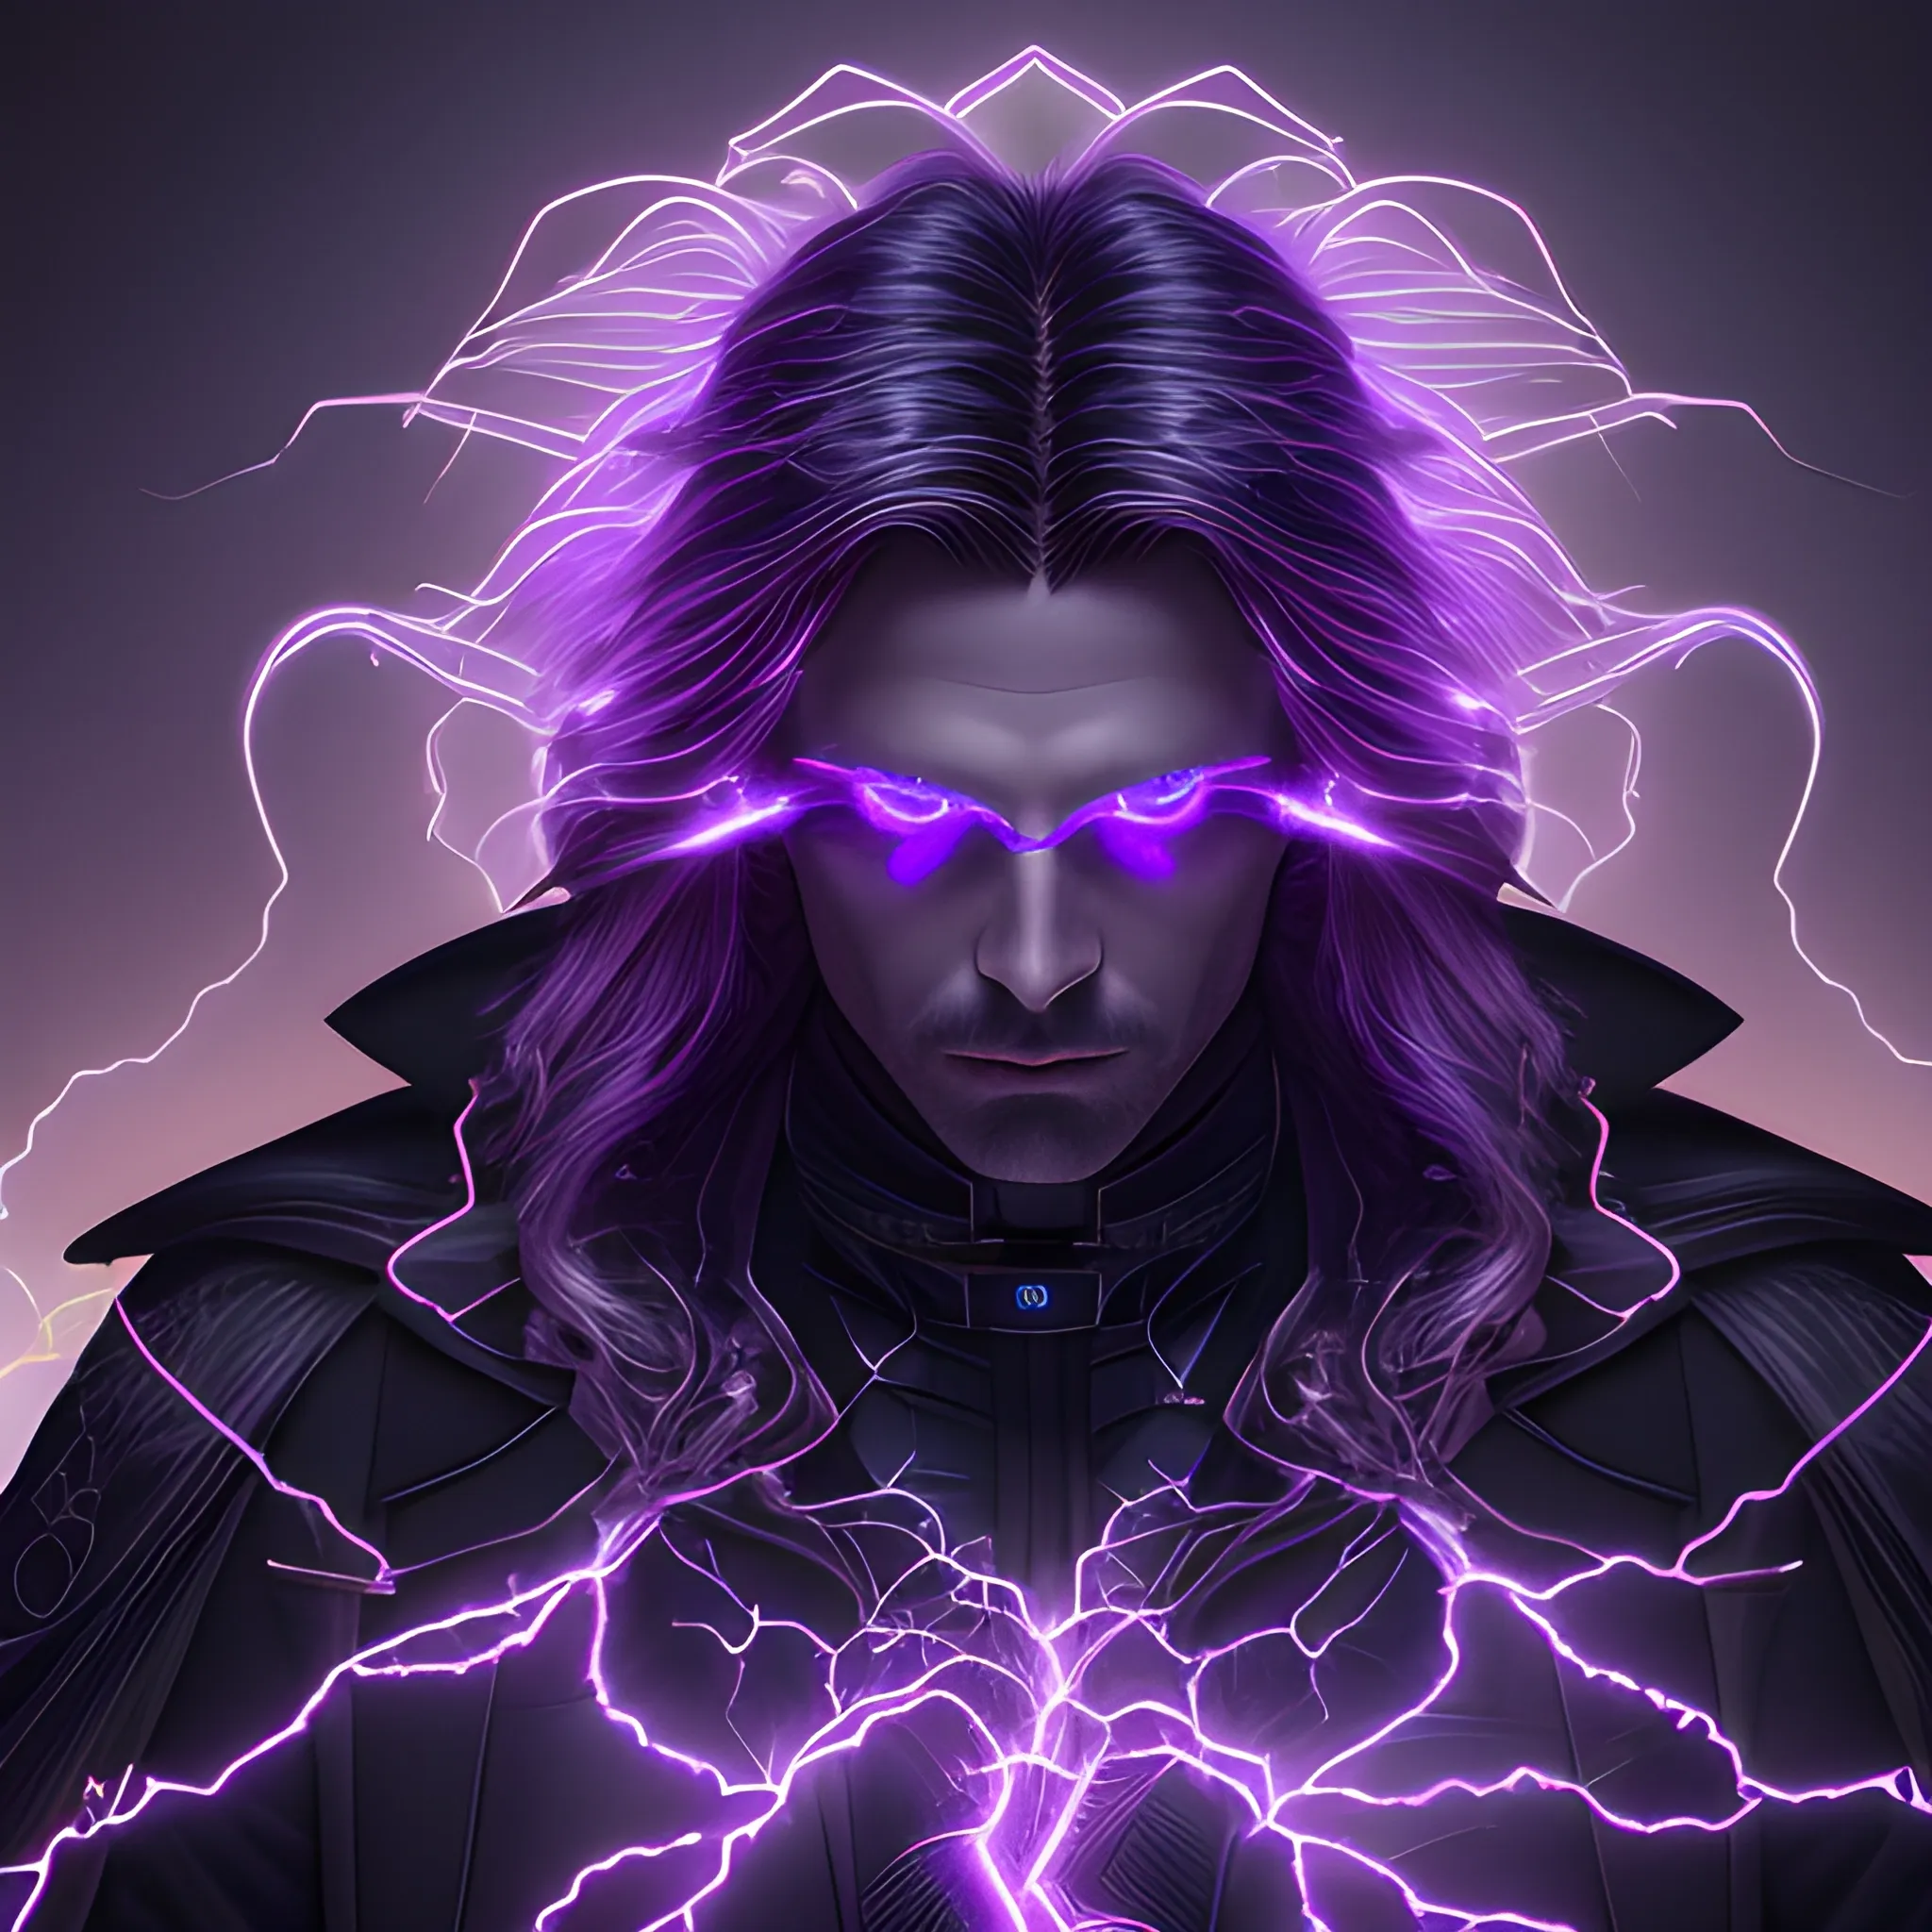 a portrait of a man, glowing eyes, long hair, background lightnings, smog, fantasy, black suit and glowing lights on it, the purple is dominant, elegant, hyperrialistic, ultra detailed, filigree, cable electric wires, feathers, 3/4 view,